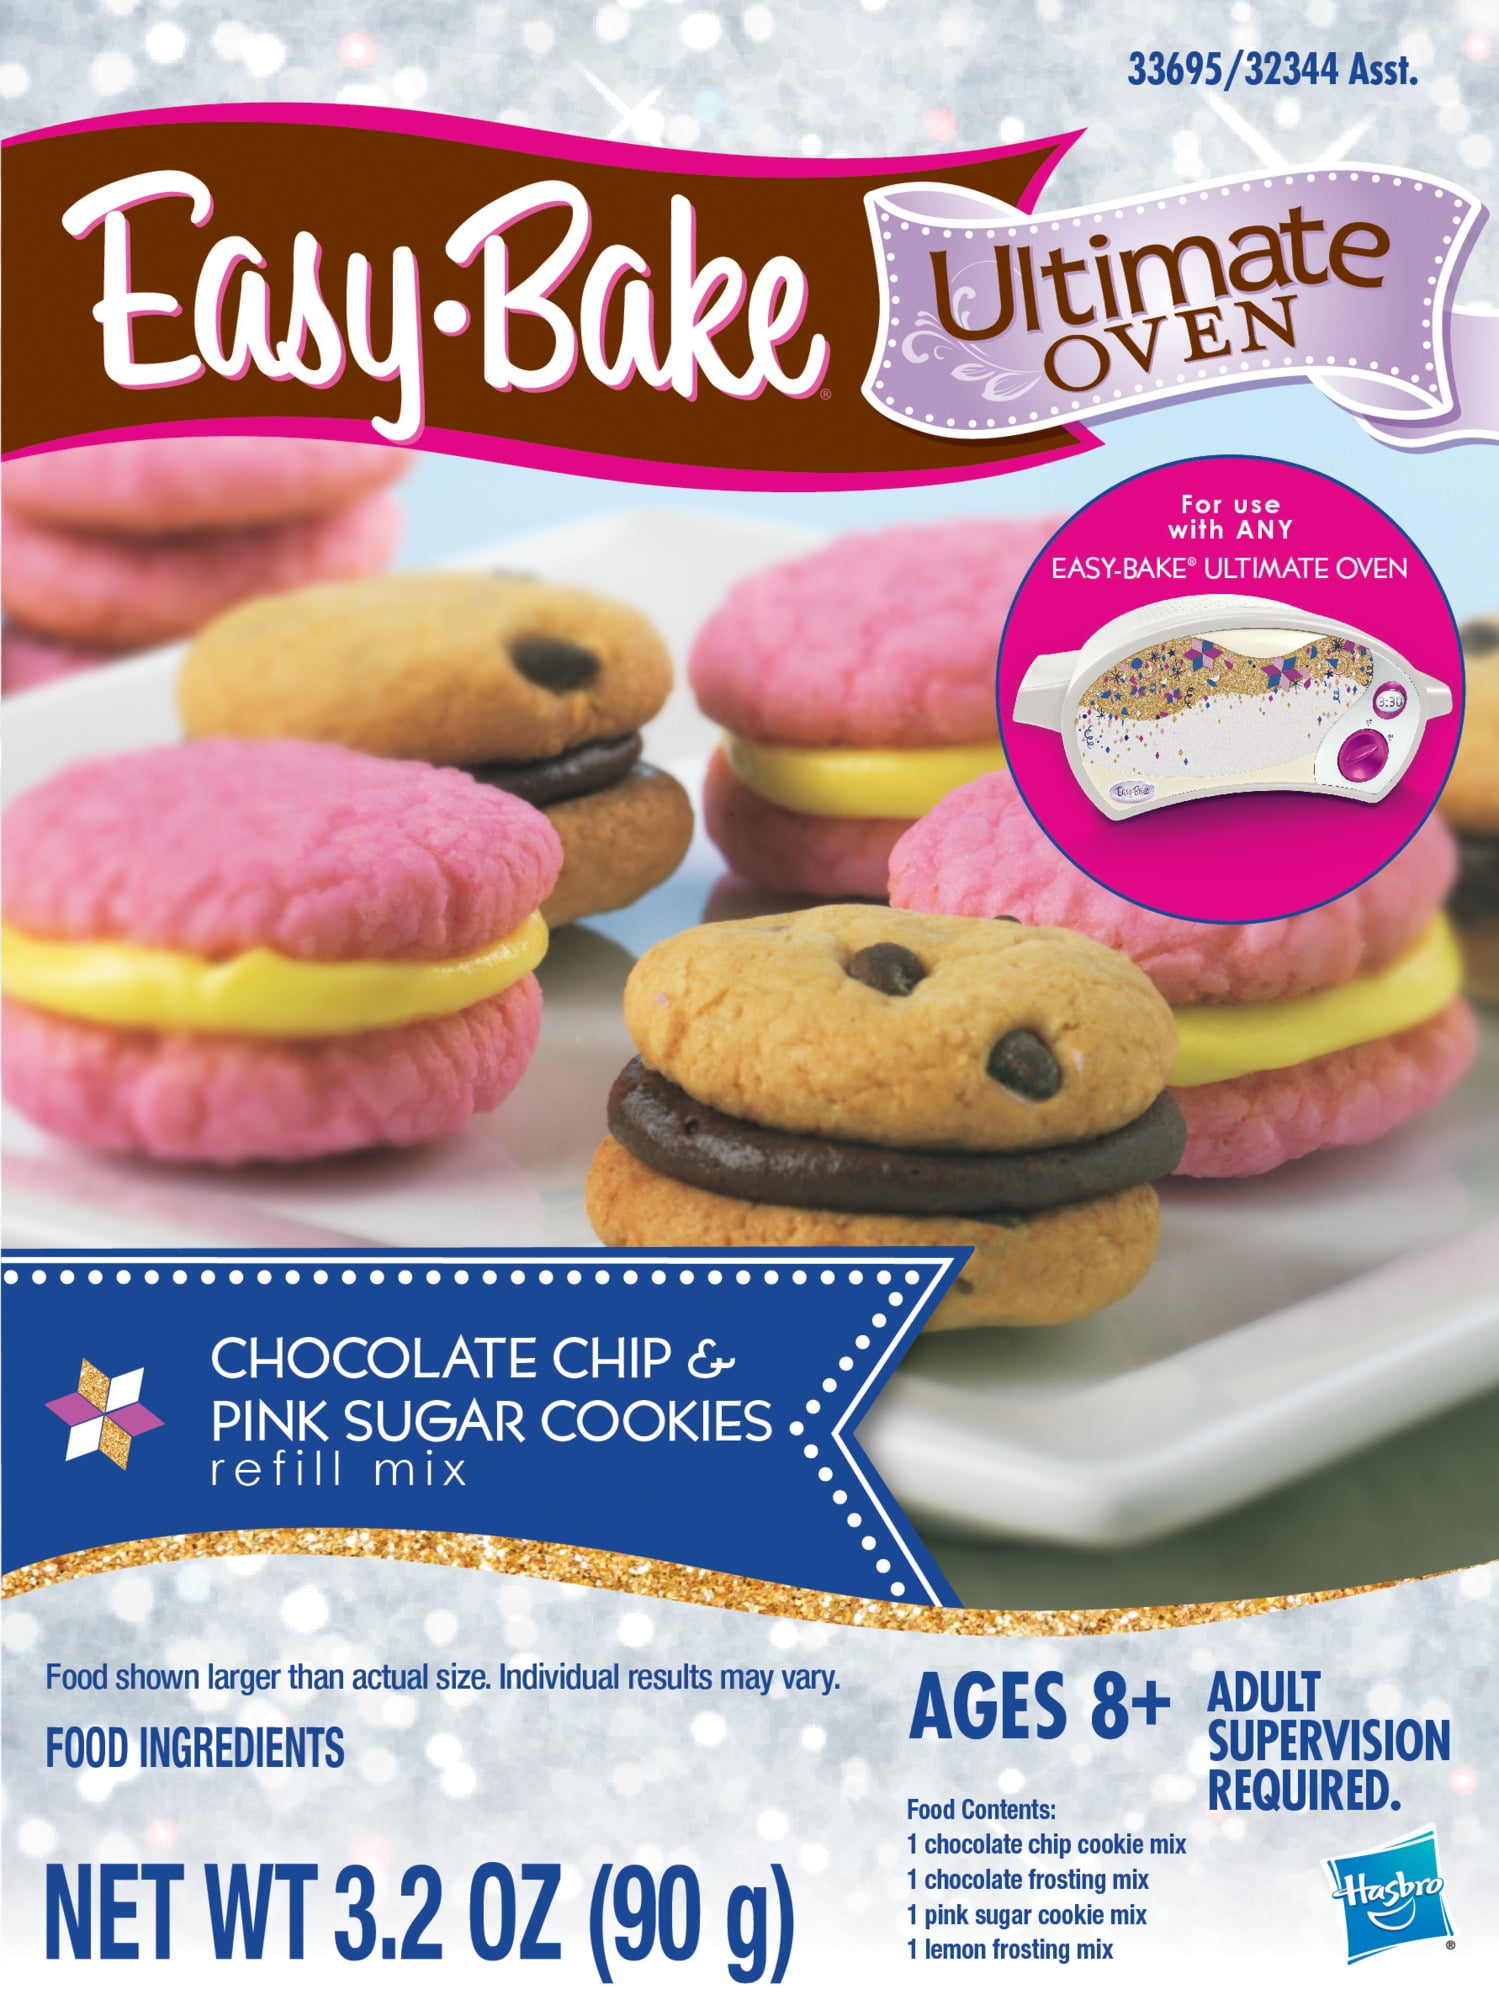 Party Pretzles Easy Bake Oven Ultimate Refill mix 3 pack Cookies Cheese Pizza 